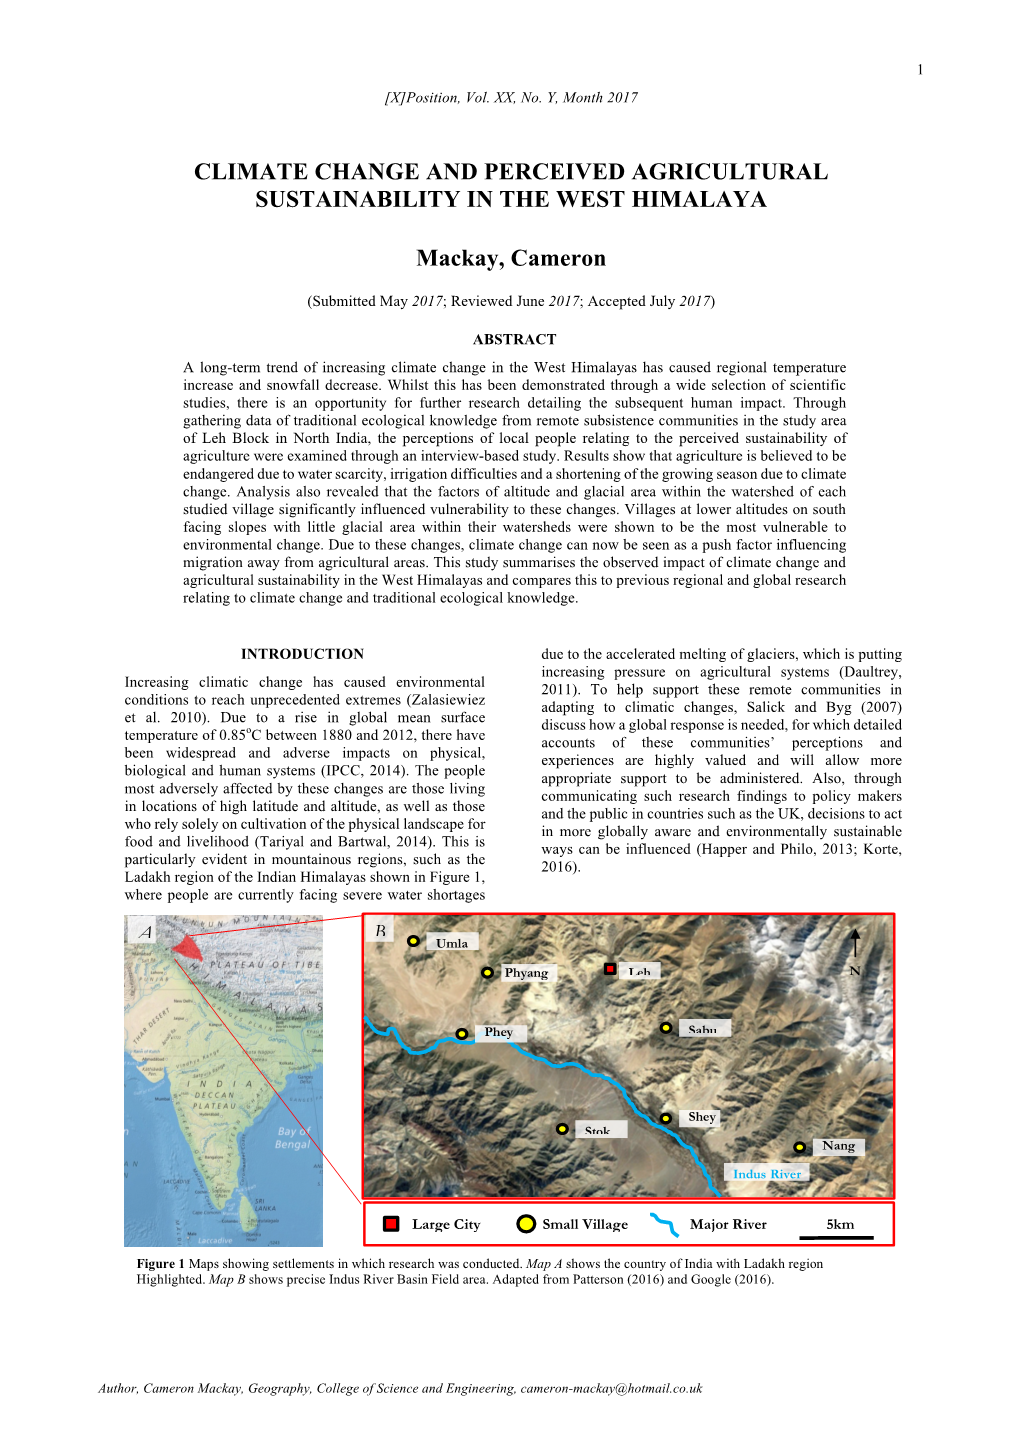 Climate Change and Perceived Agricultural Sustainability in the West Himalaya